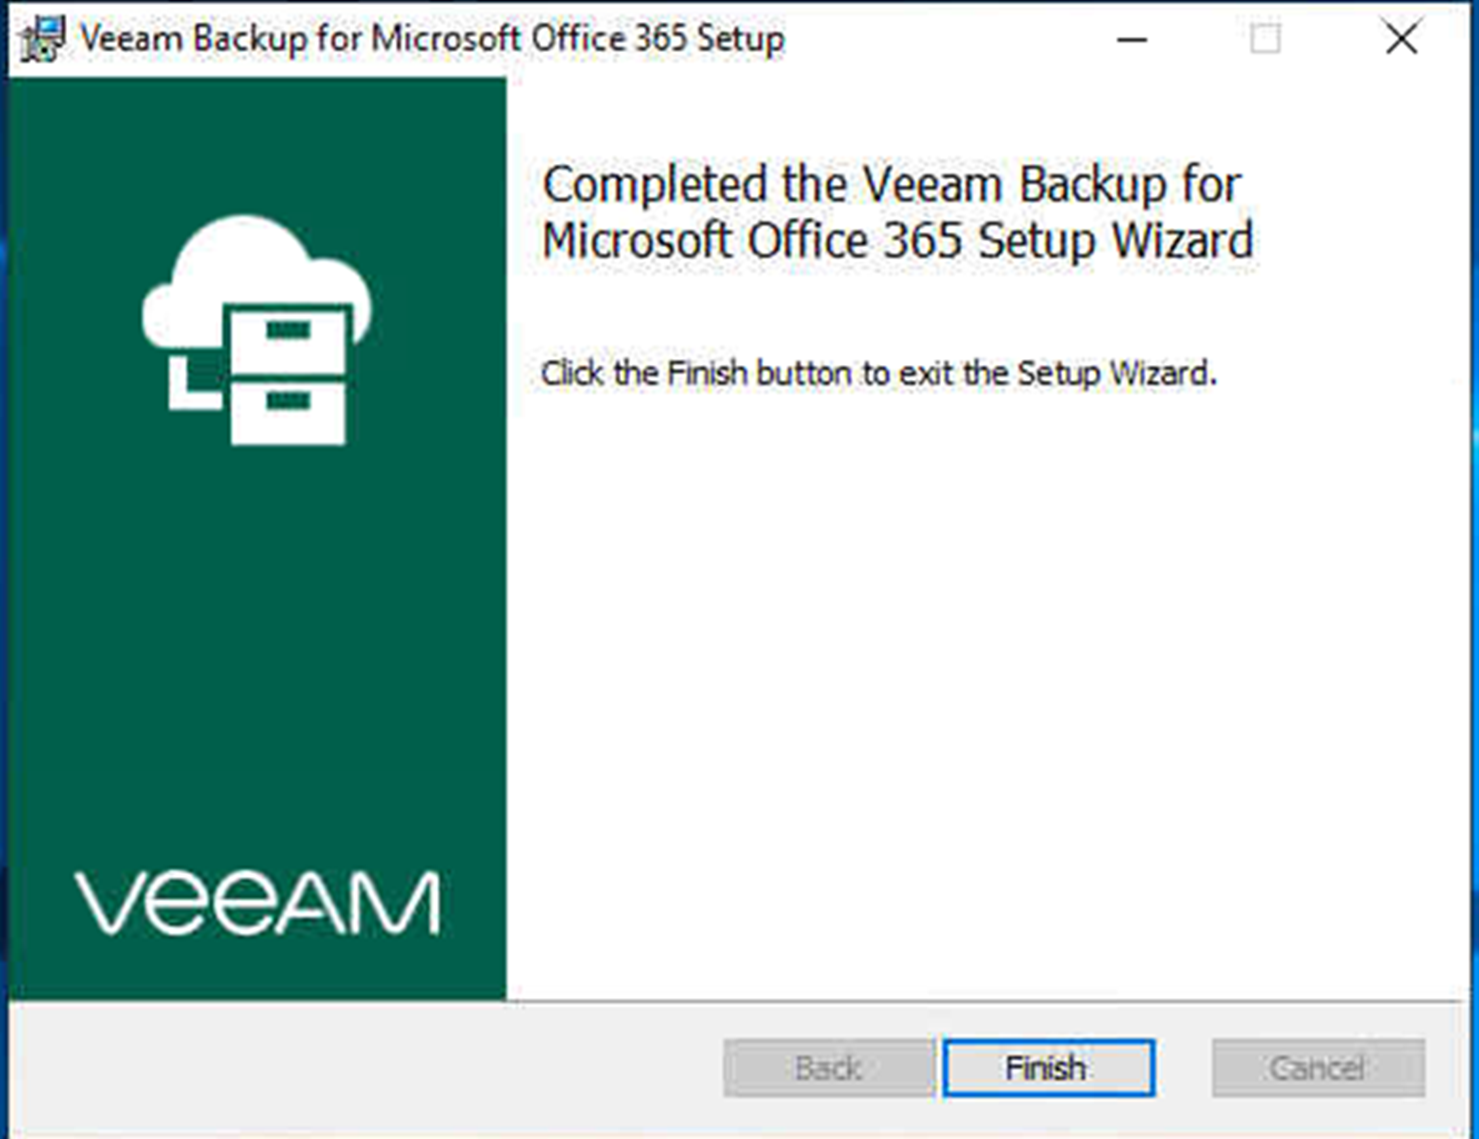 041019 0233 HowtoInstal8 - How to Install Veeam Backup for Microsoft Office 365